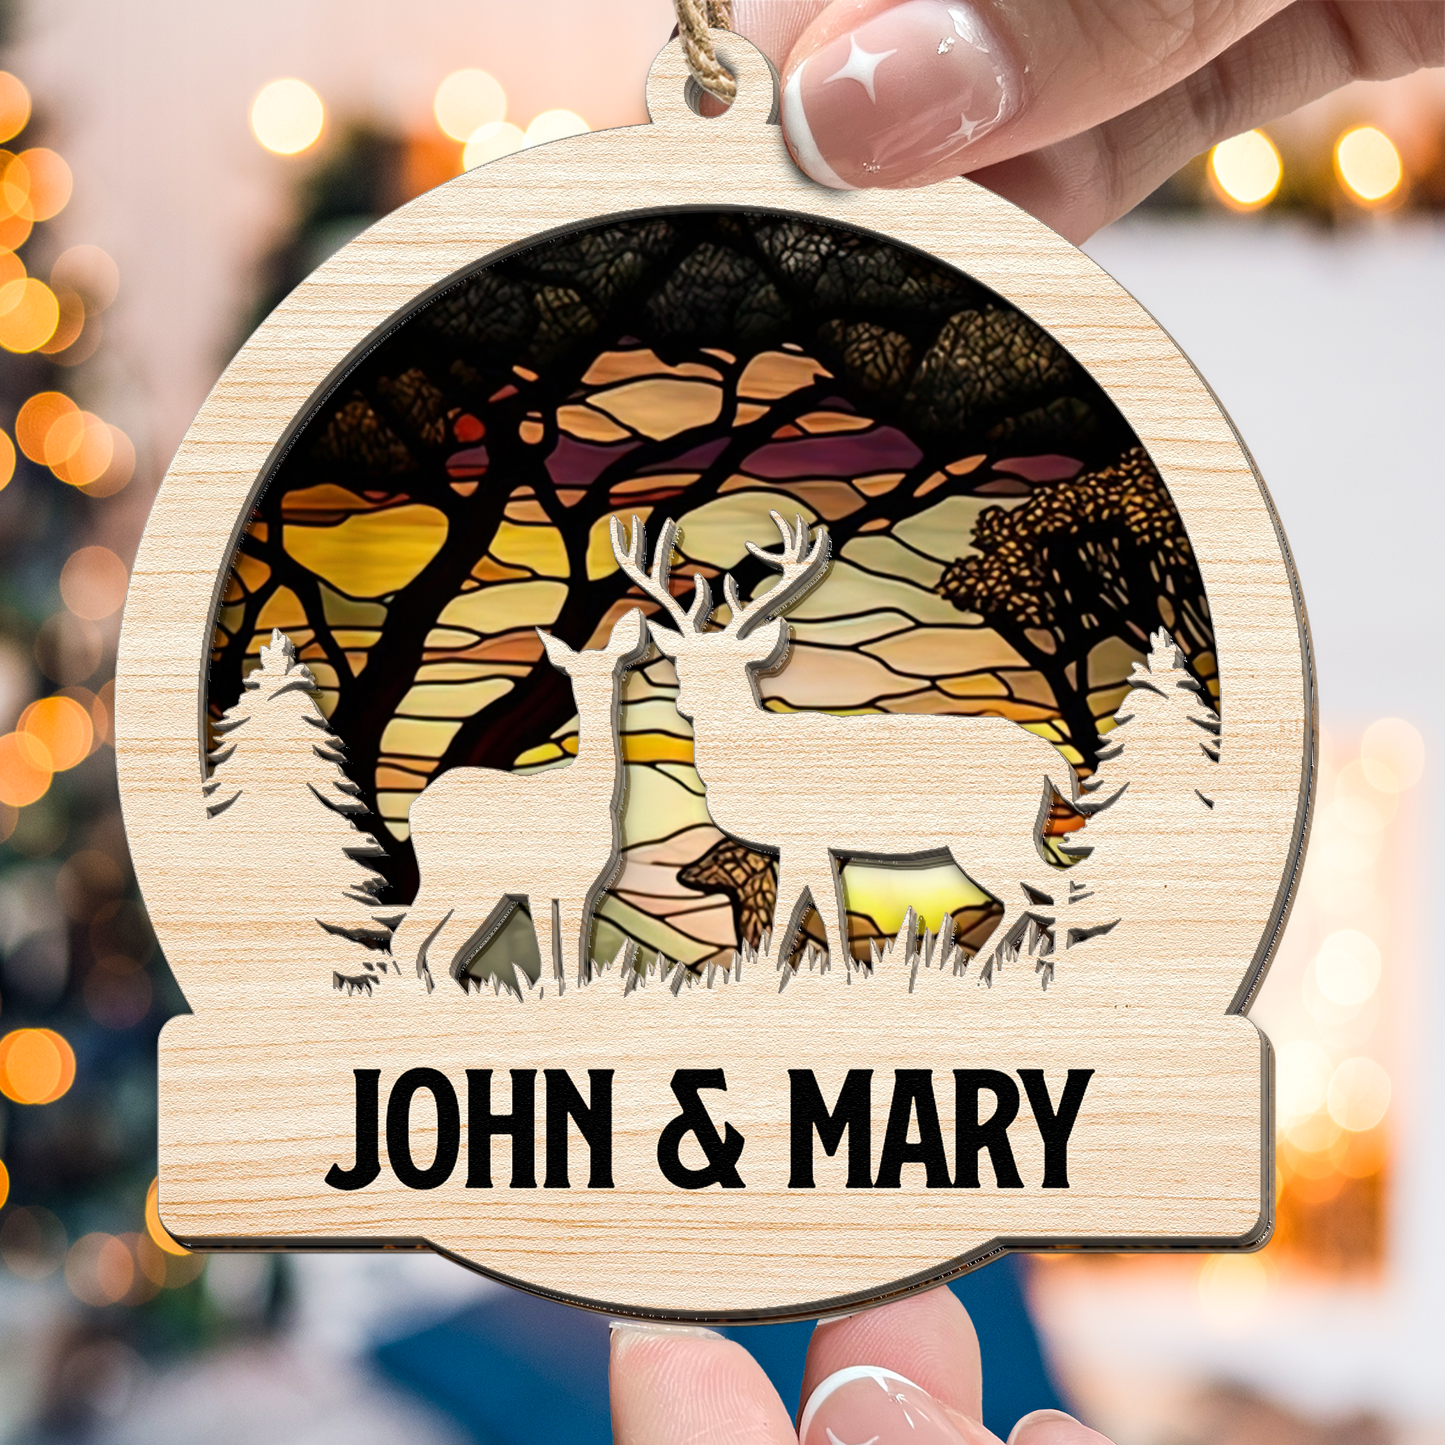 Deer Couple Hunting Gift - Personalized Suncatcher Ornament